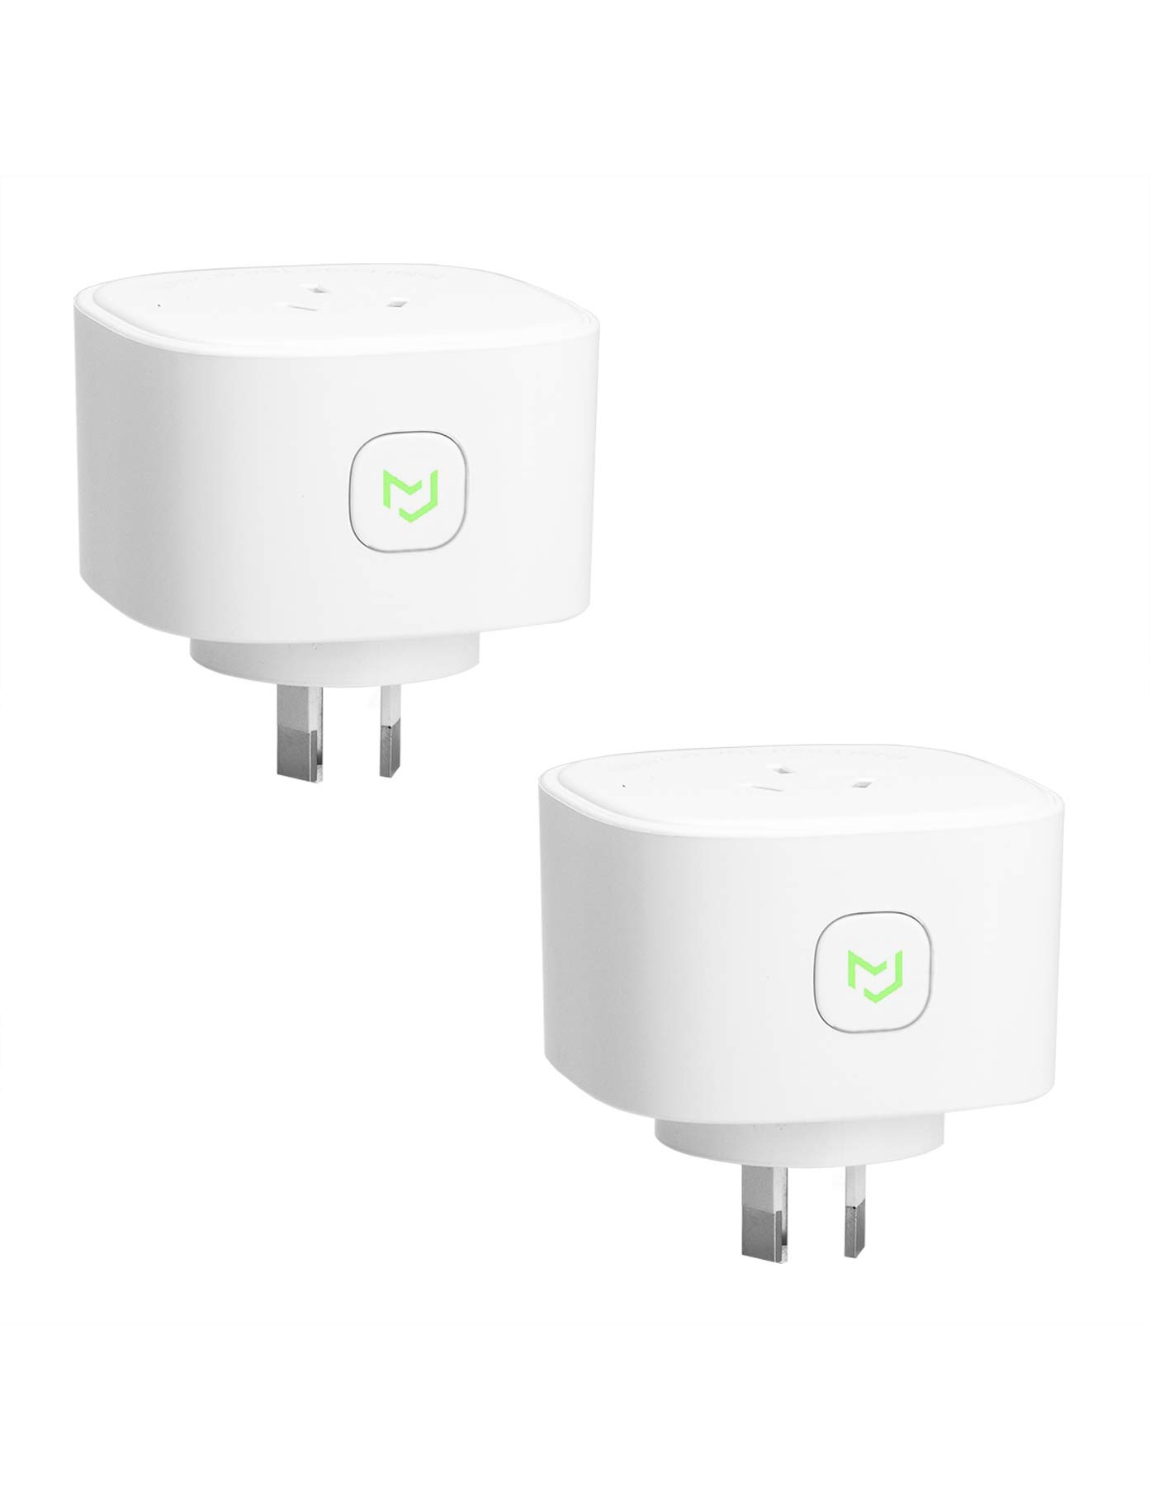 Meross Smart Wi-Fi Plug with Energy Monitor, MSS310, 2 Pack (AU Version)